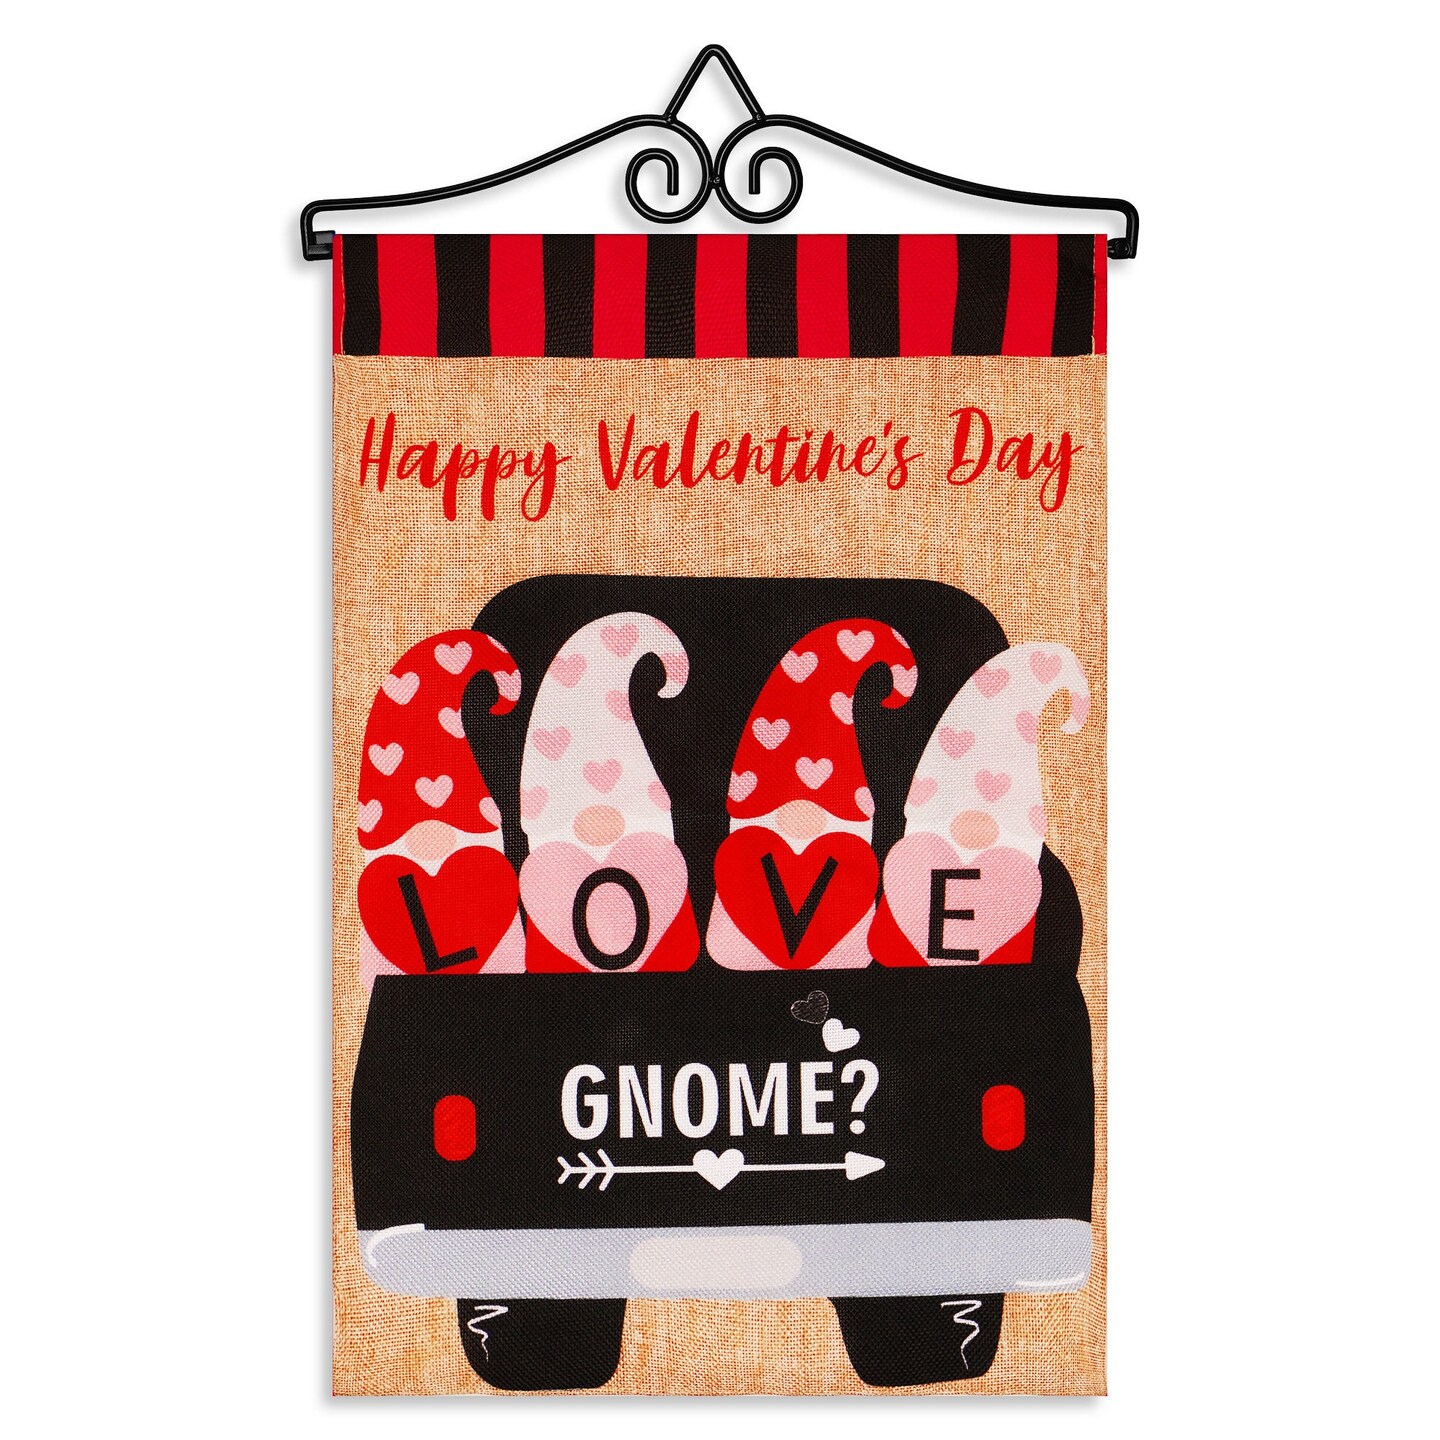 G128 Combo Pack Garden Flag Hanger 14IN &#x26; Garden Flag Happy Valentine&#x27;s Day Love 4 Gnomes in Truck 12x18IN Printed Double Sided Burlap Fabric